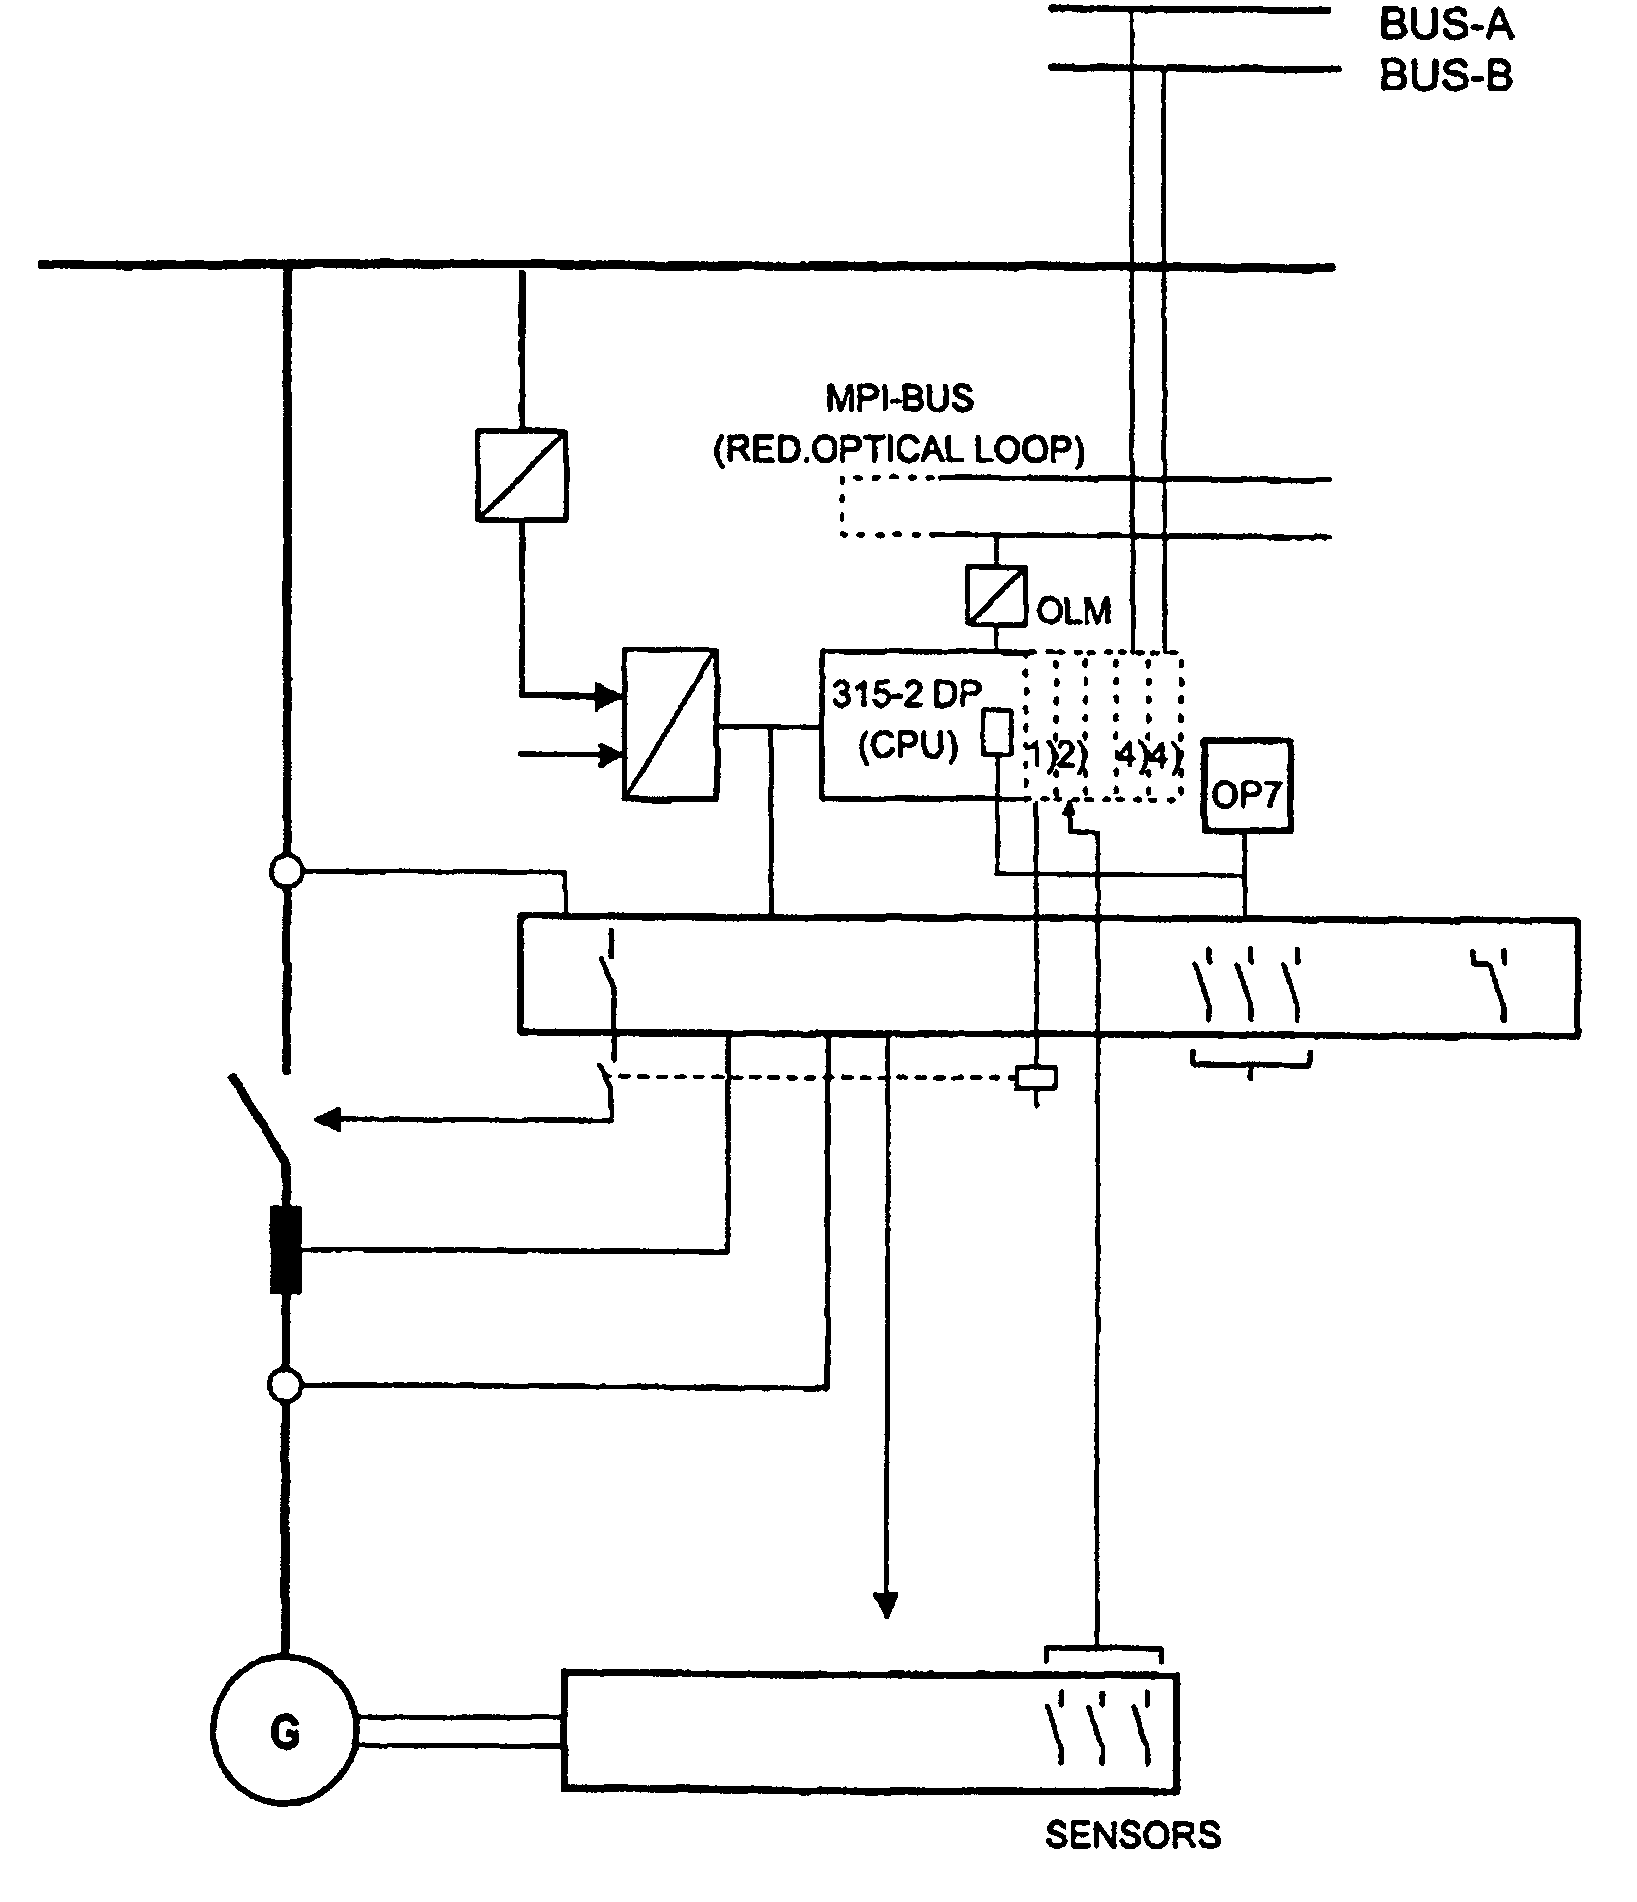 Electrical system for a ship